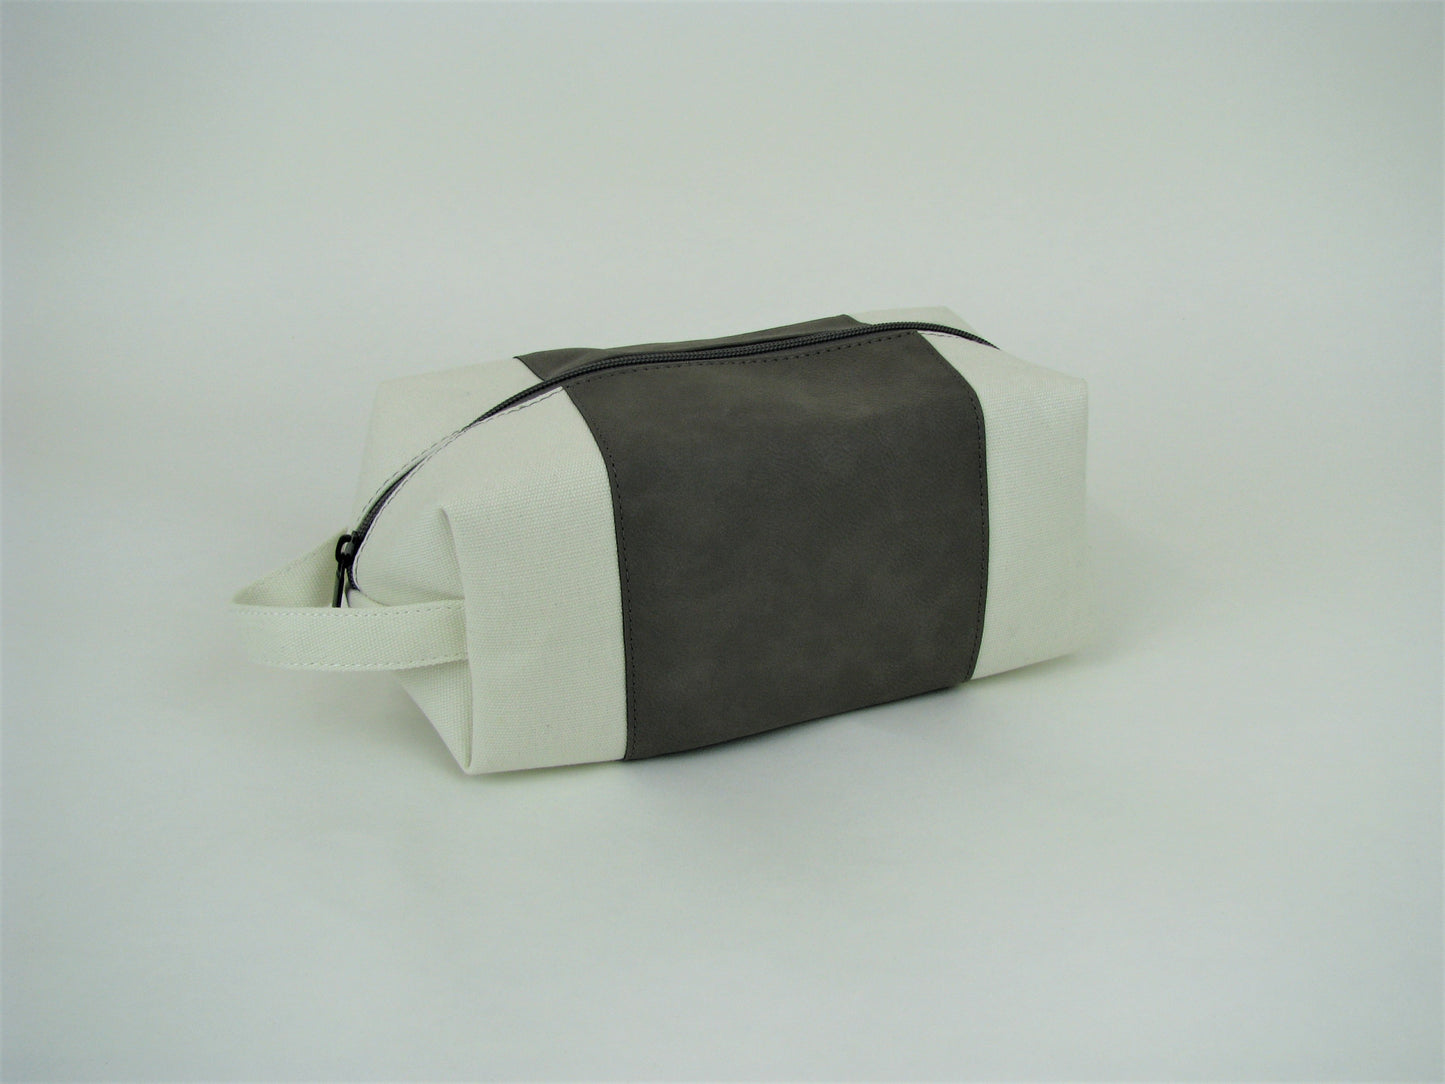 Leatherette Canvas Large Cosmetic Bag/Travel Bag